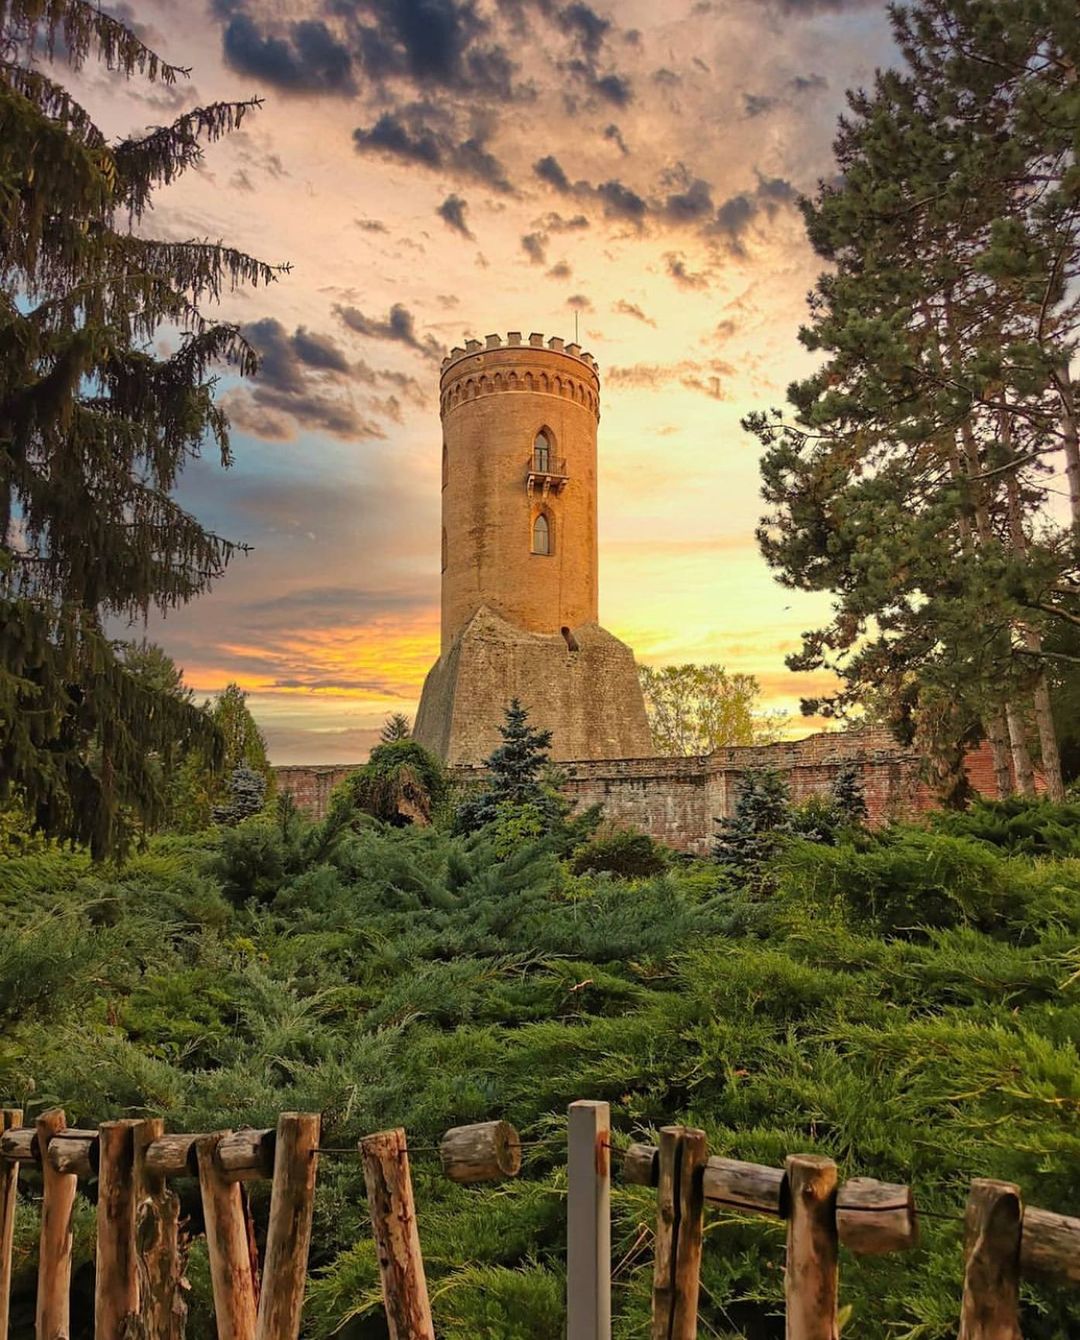 Tower of Chindia, built by Lord Vlad the Impaler, and part of the Royal Court Monument Complex in Targoviste